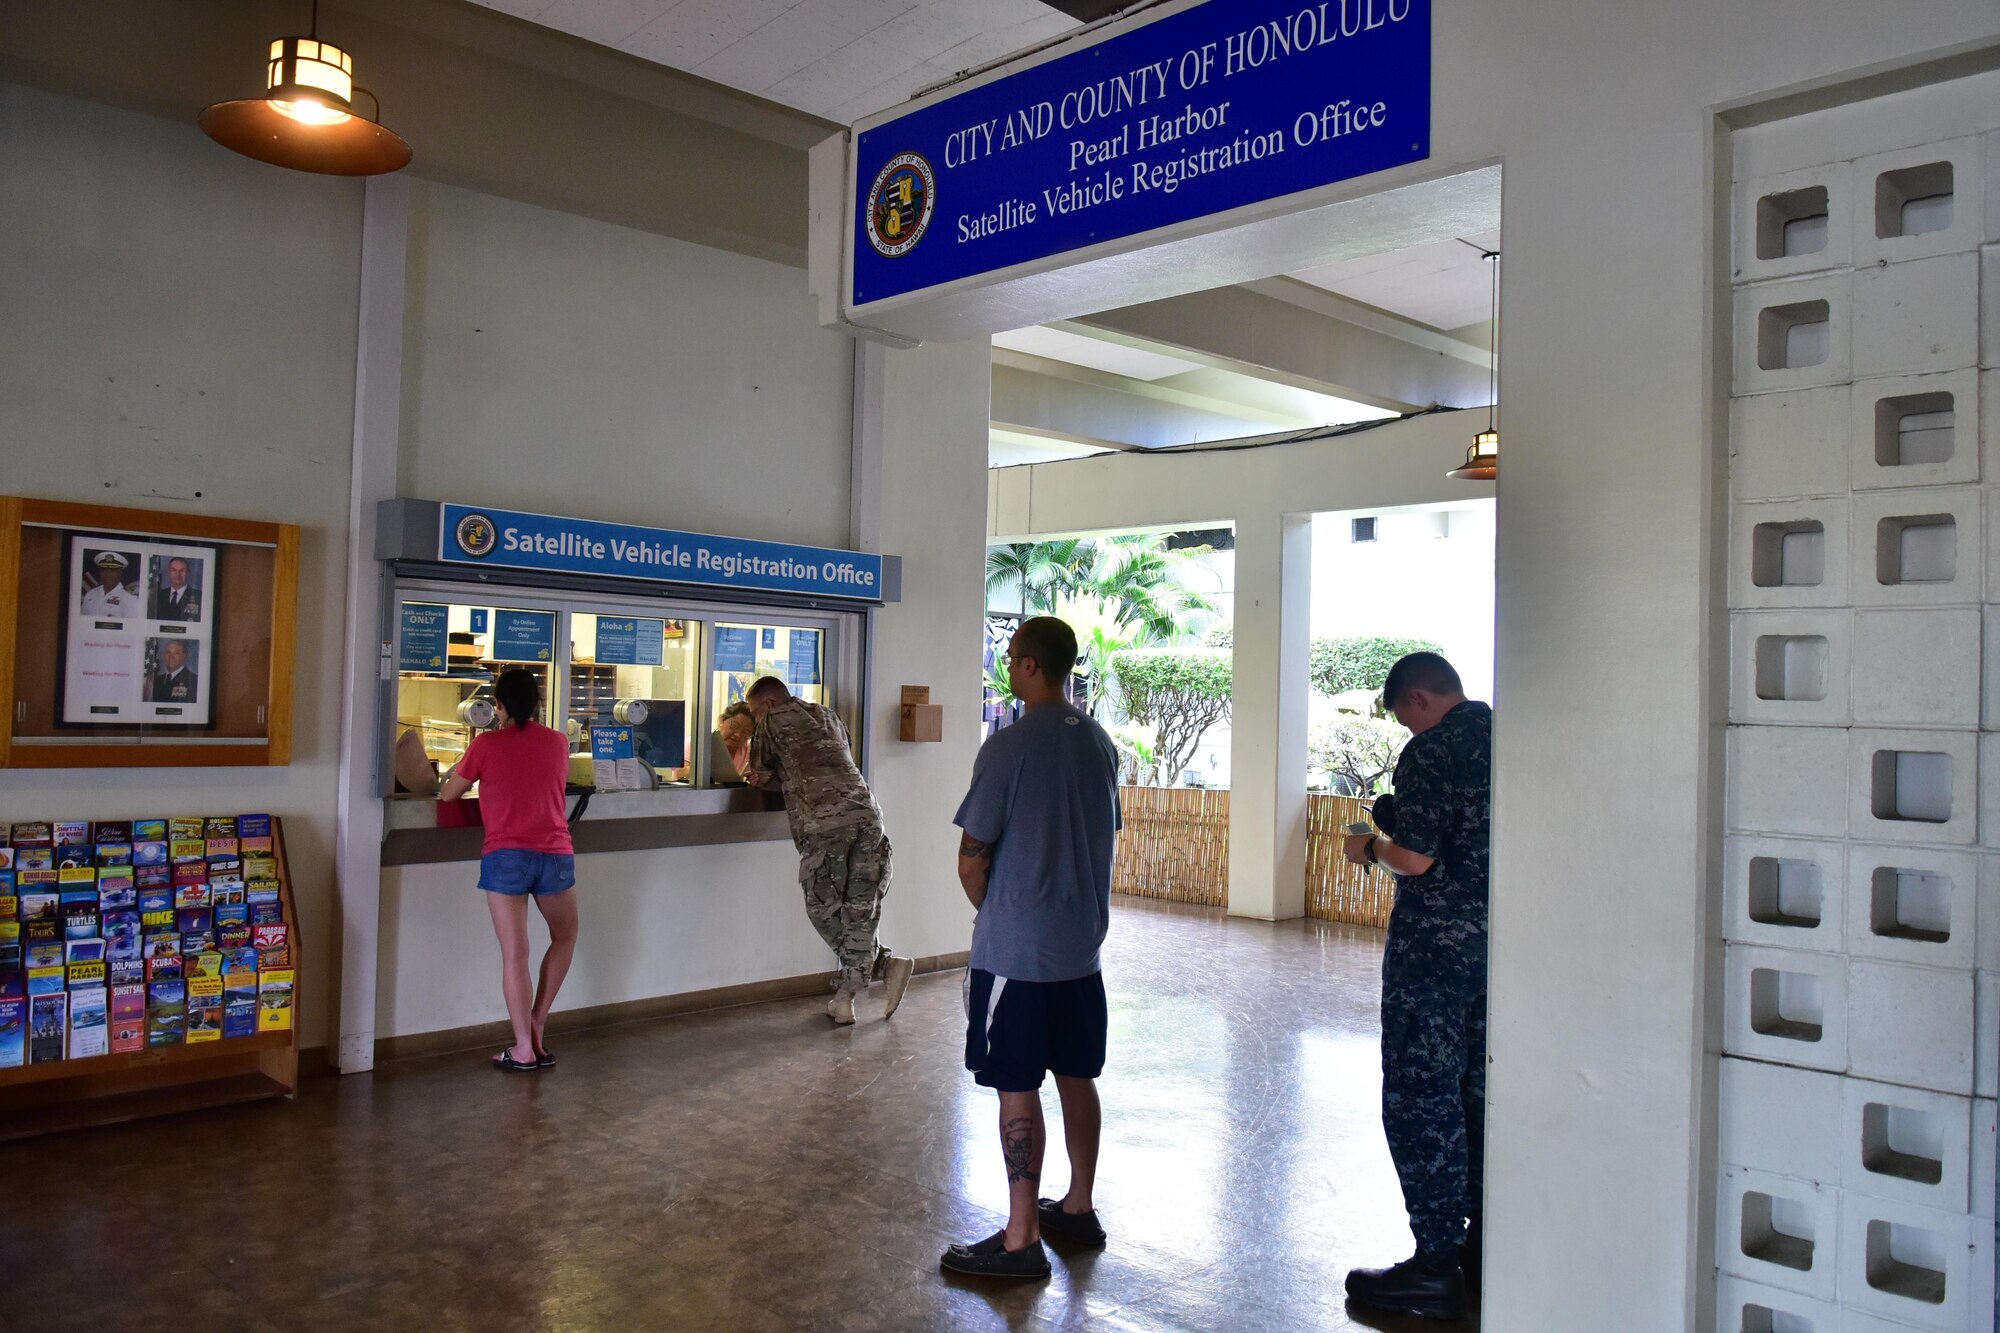 Servicemembers and their families wait for their appointment at the Satellite Vehicle Registration Office on Joint Base Pearl Harbor-Hickam, June 14, 2016. The benefits provided by the Pearl Harbor DMV include registering vehicles, out of state permits, transfer of ownership, replacement/ordering new plates, updating information, and providing particulars for other services outside of motor vehicles.
(U.S. Air Force photo by Tylyn Taylor/Released)
